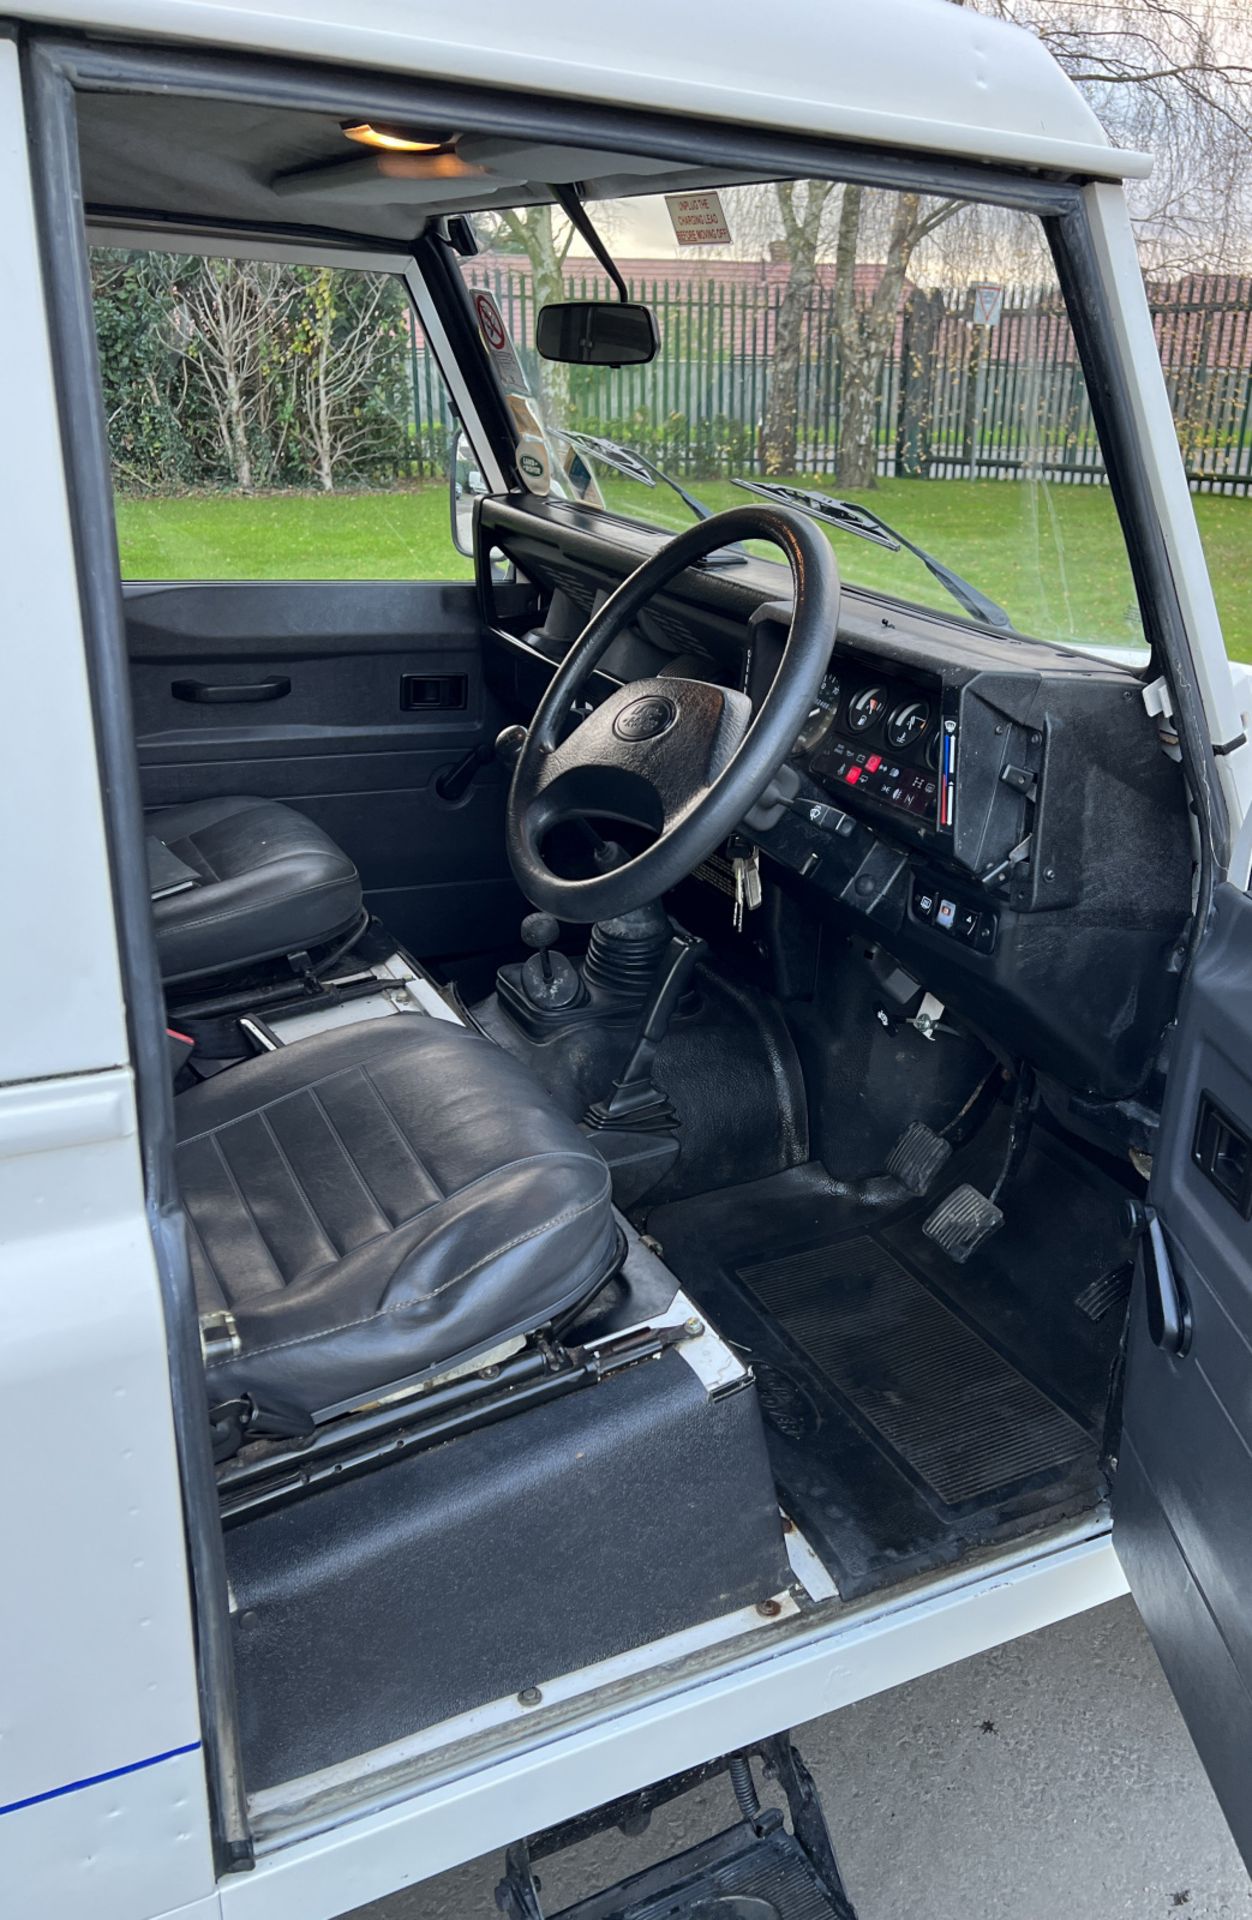 Land Rover Defender 110TDI - 1995 - Very low mileage at 24095 miles - 2.5L diesel - white - Image 13 of 49